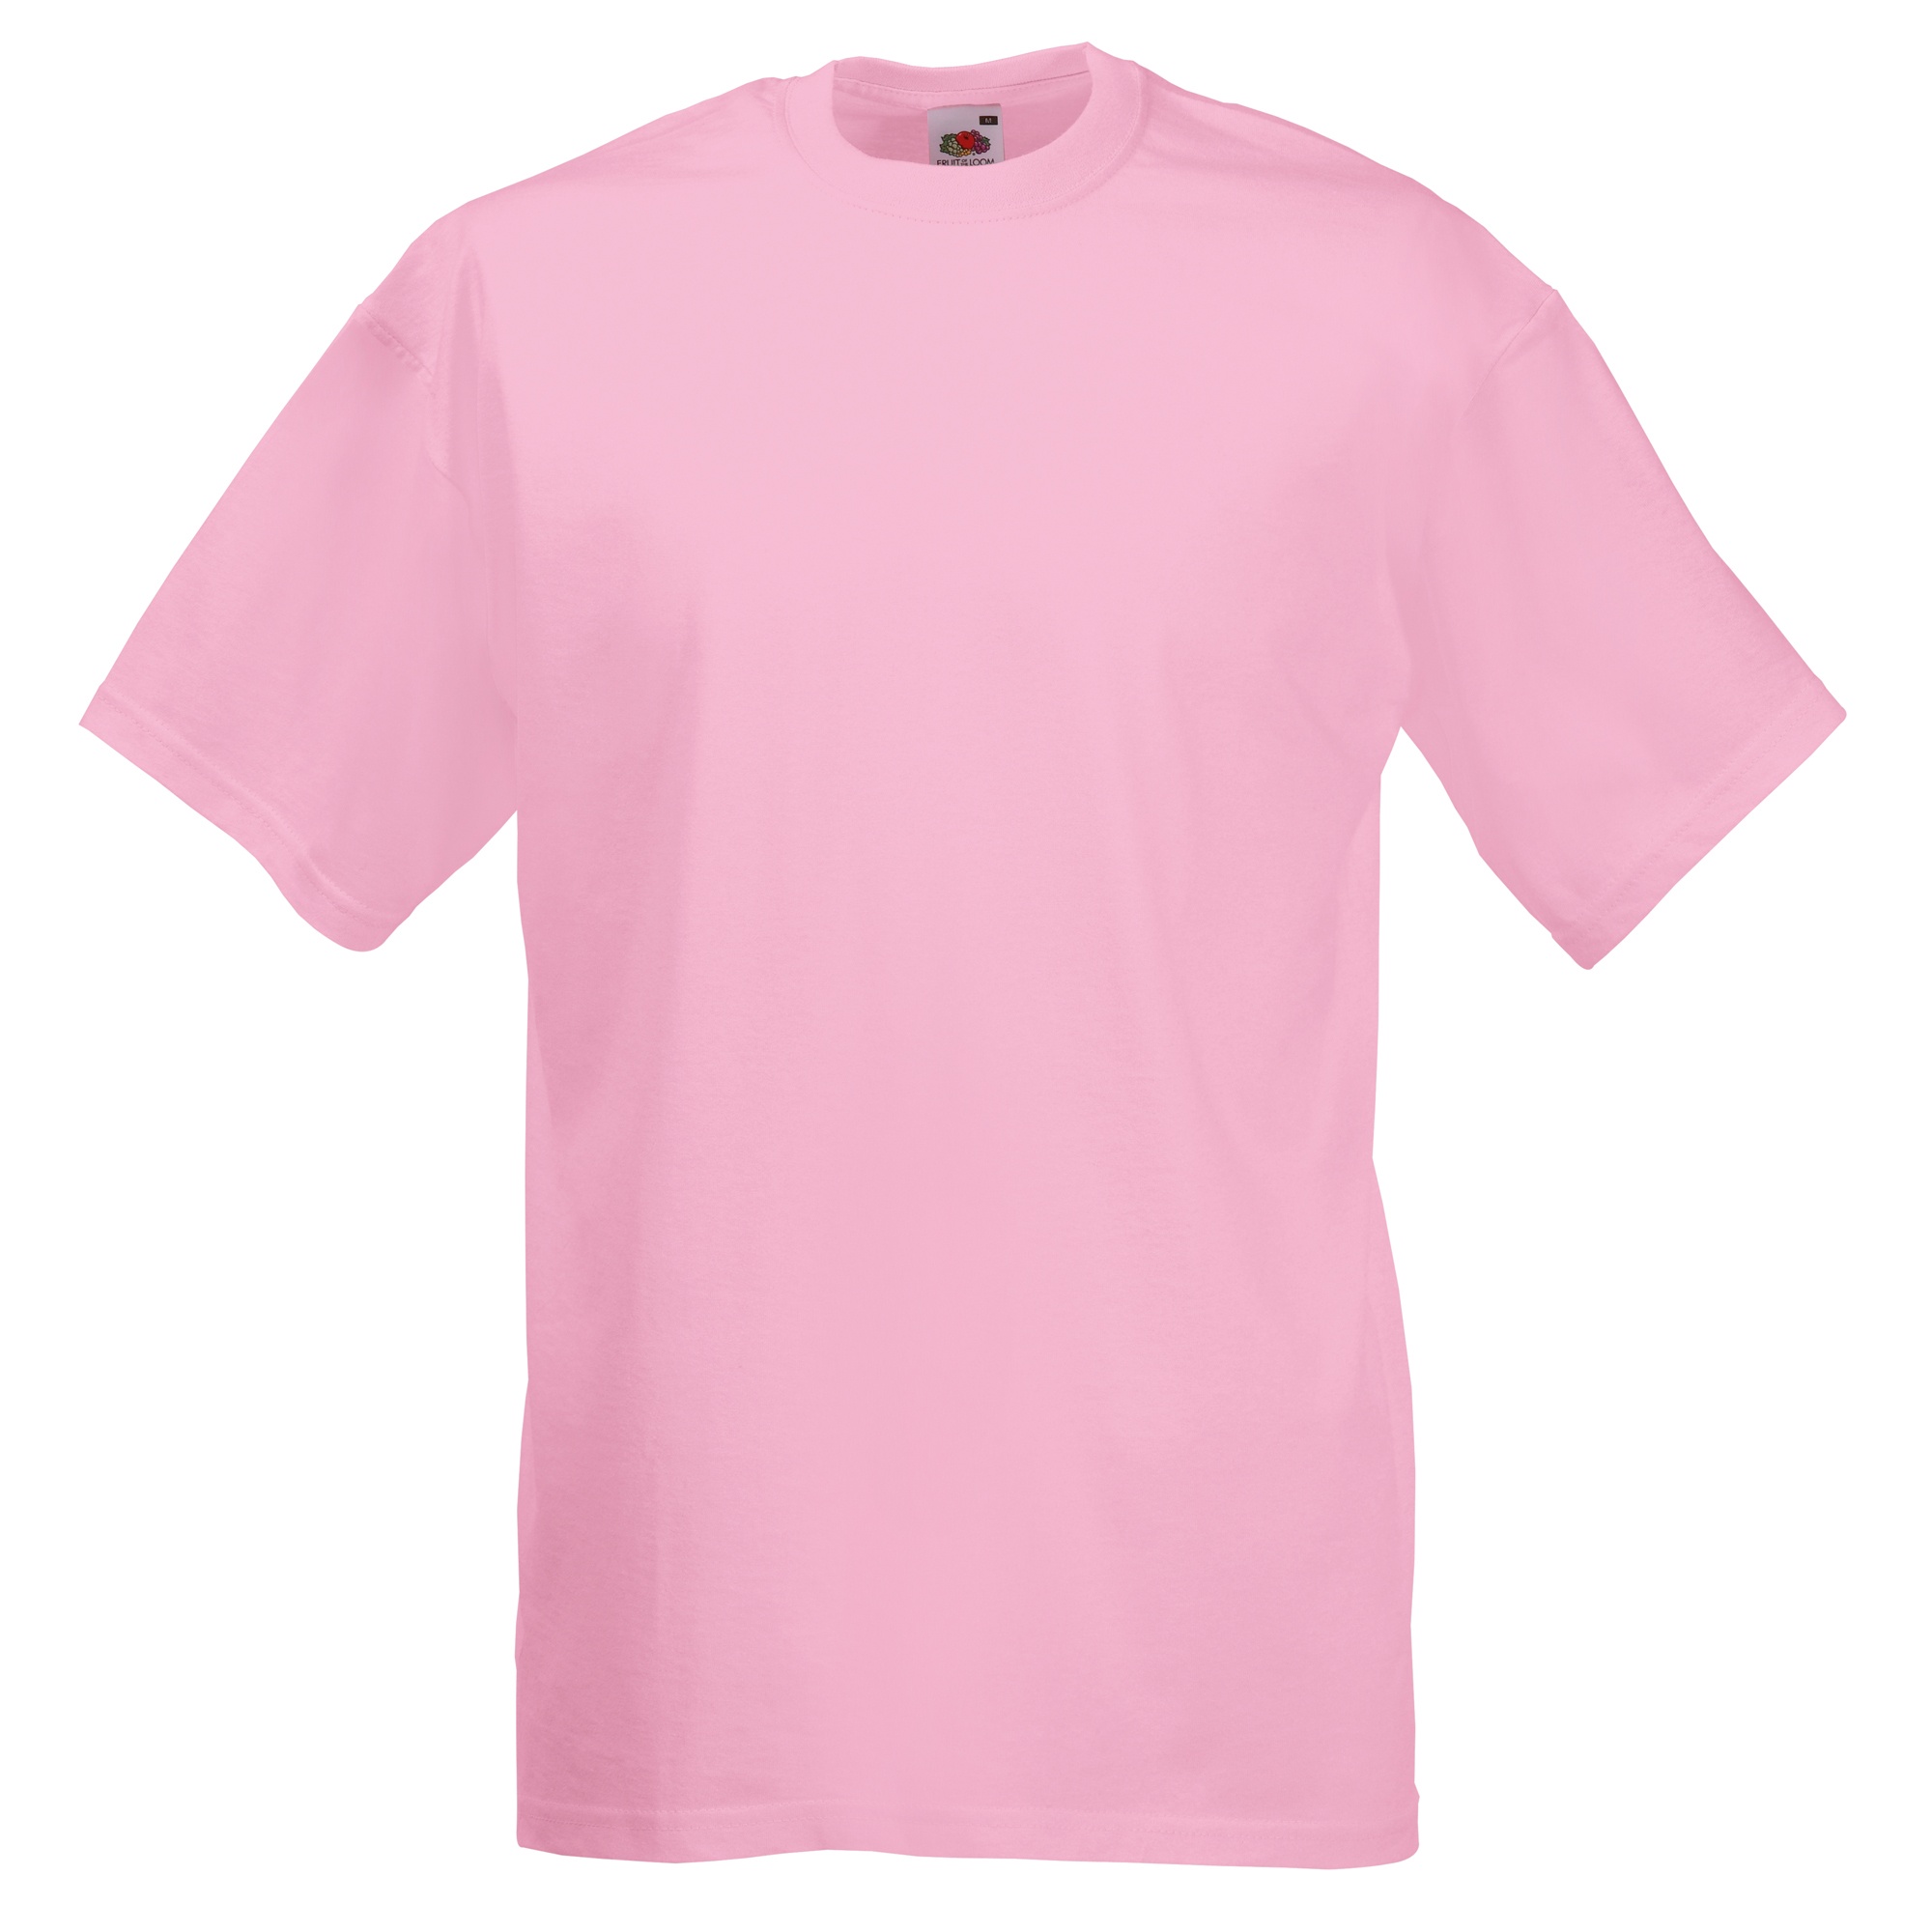 T-shirt Fruit Of The Loom Valueweight - rosa - 